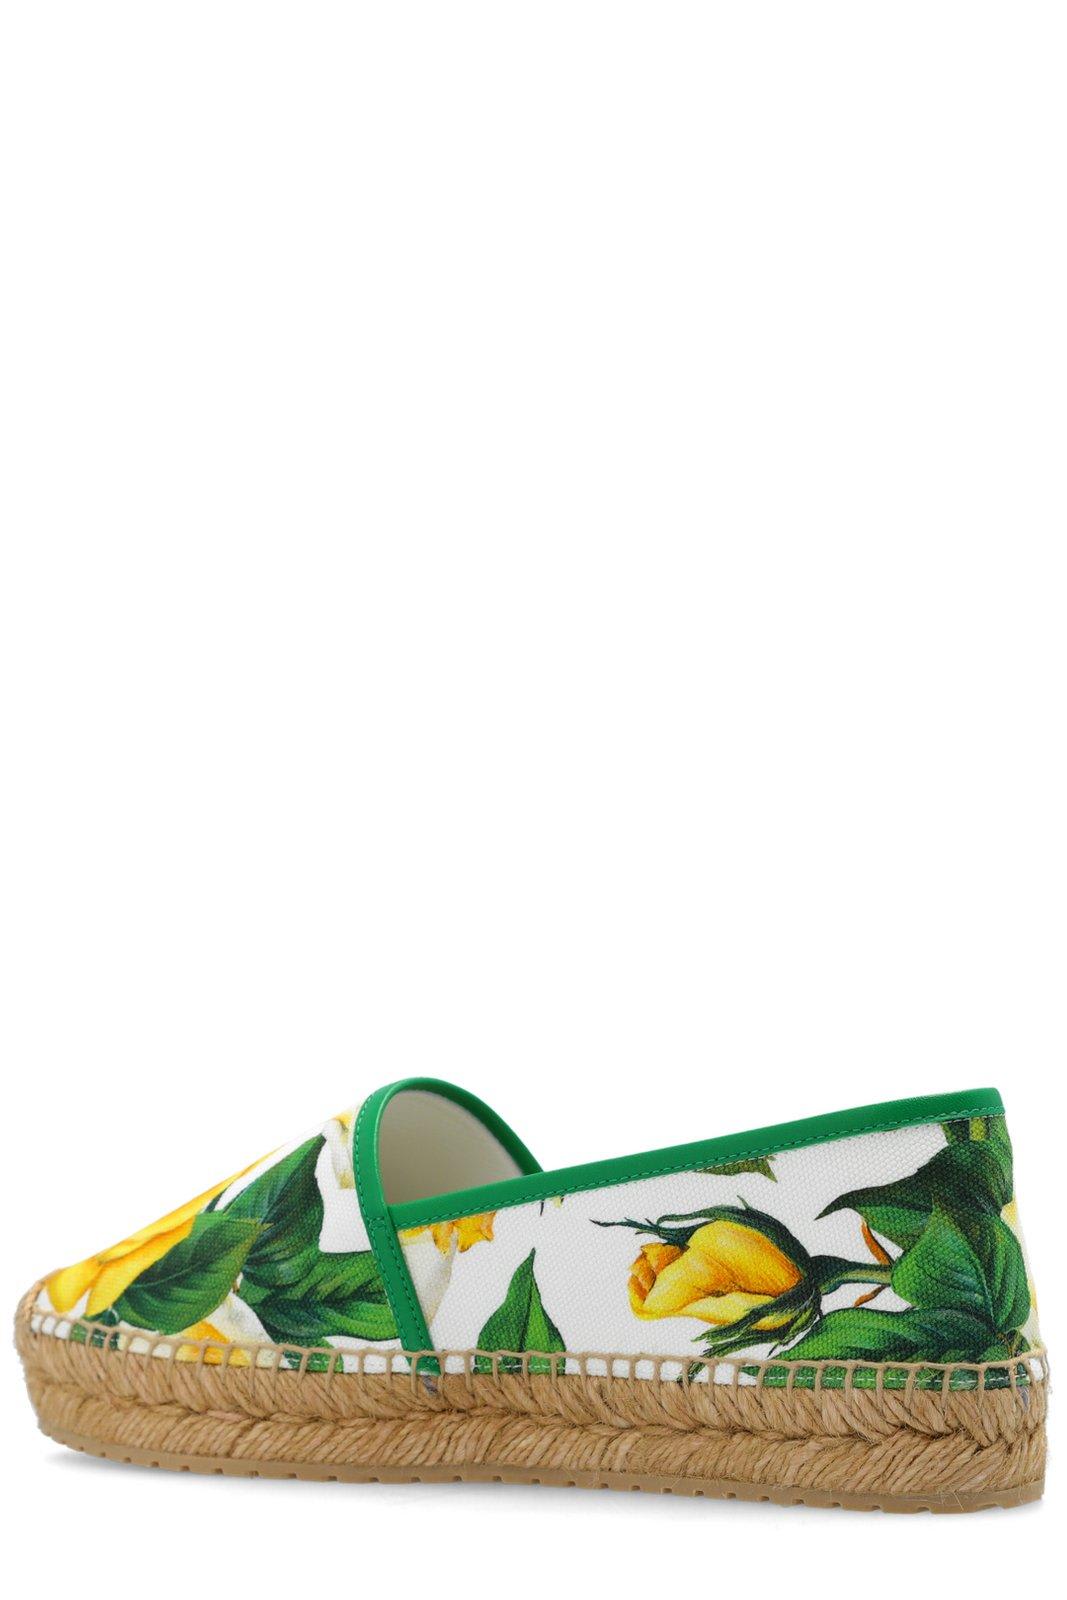 Shop Dolce & Gabbana Floral Printed Espadrilles In Gialla